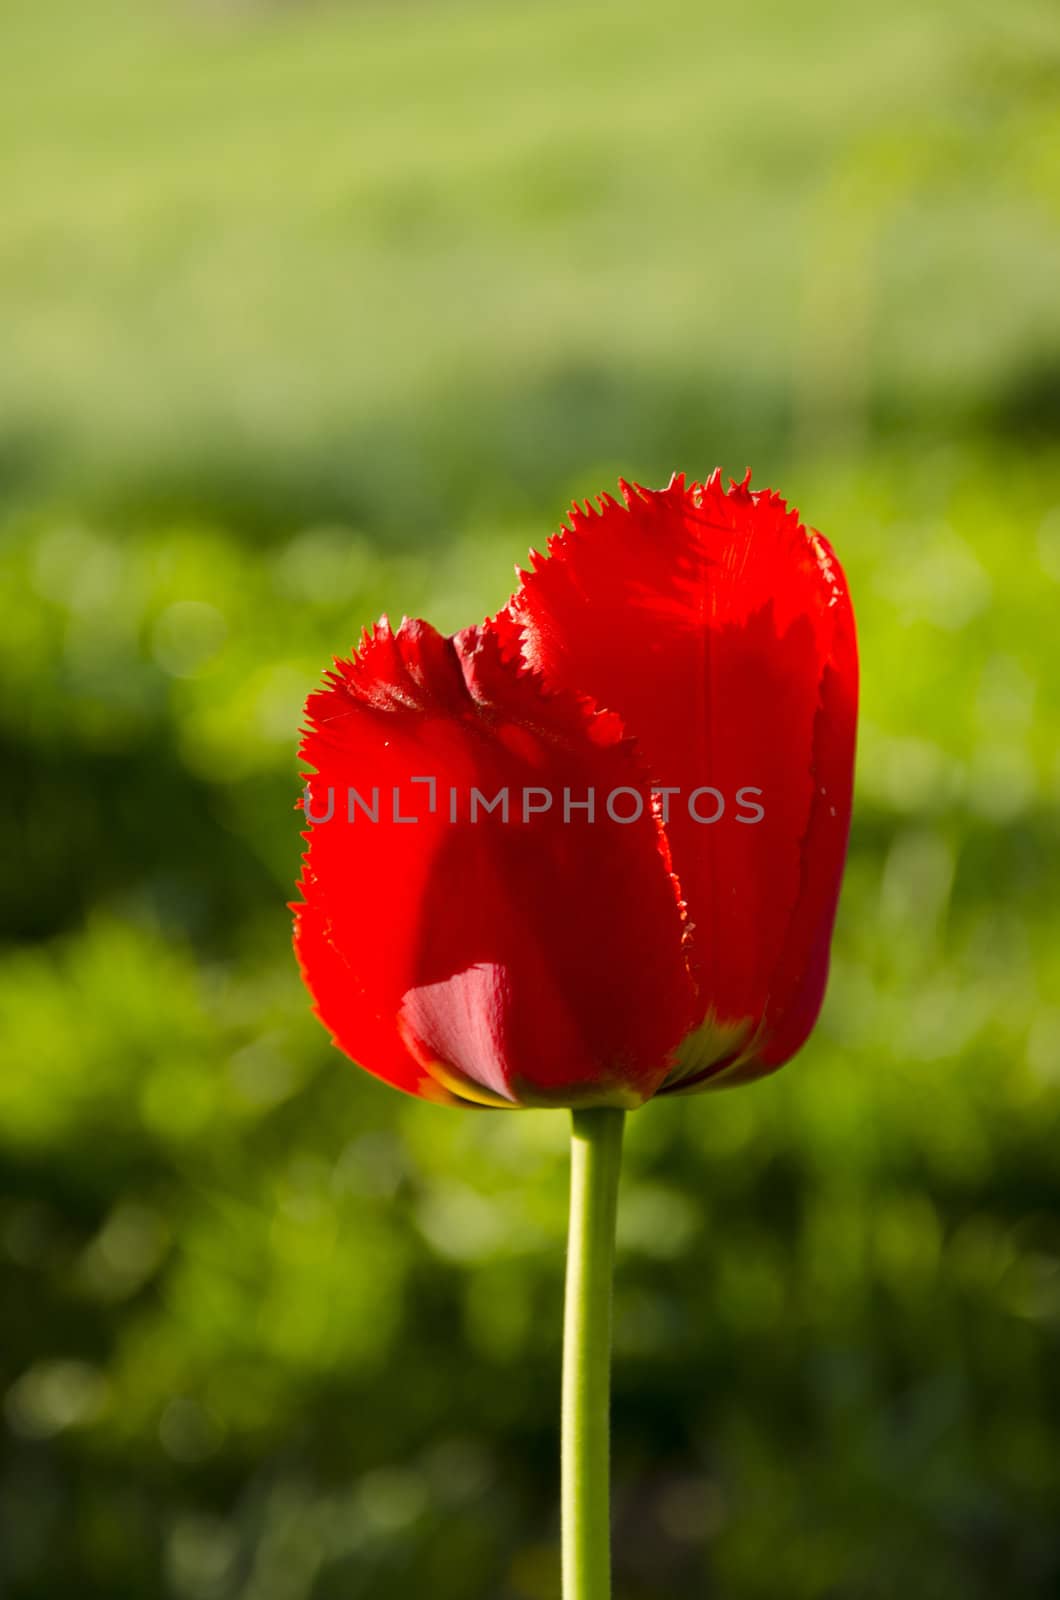 Red tulip bloom in a green blur background.